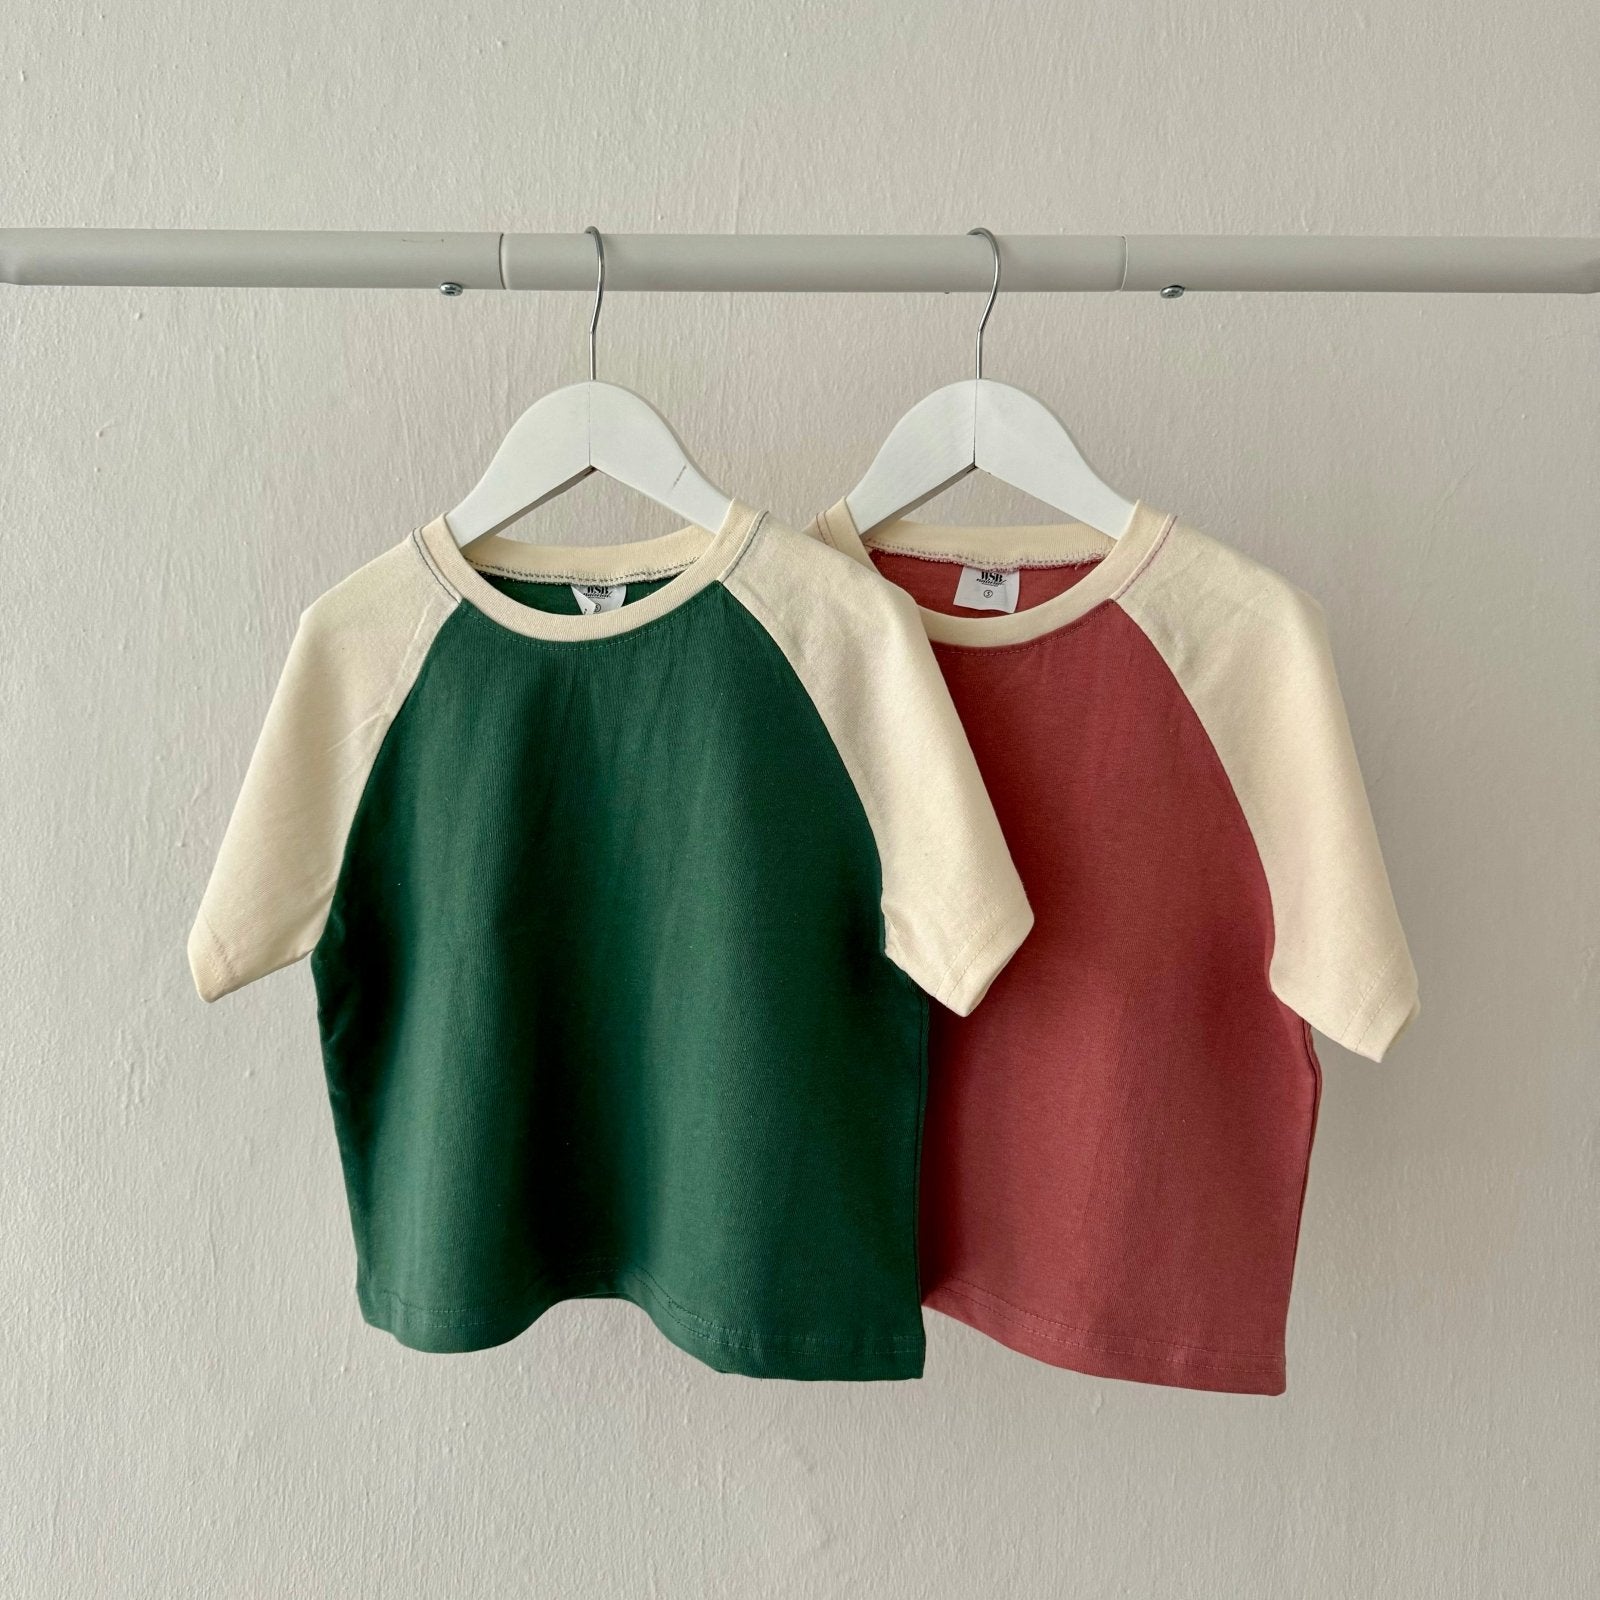 Raglan Short Sleeve Tee find Stylish Fashion for Little People- at Little Foxx Concept Store